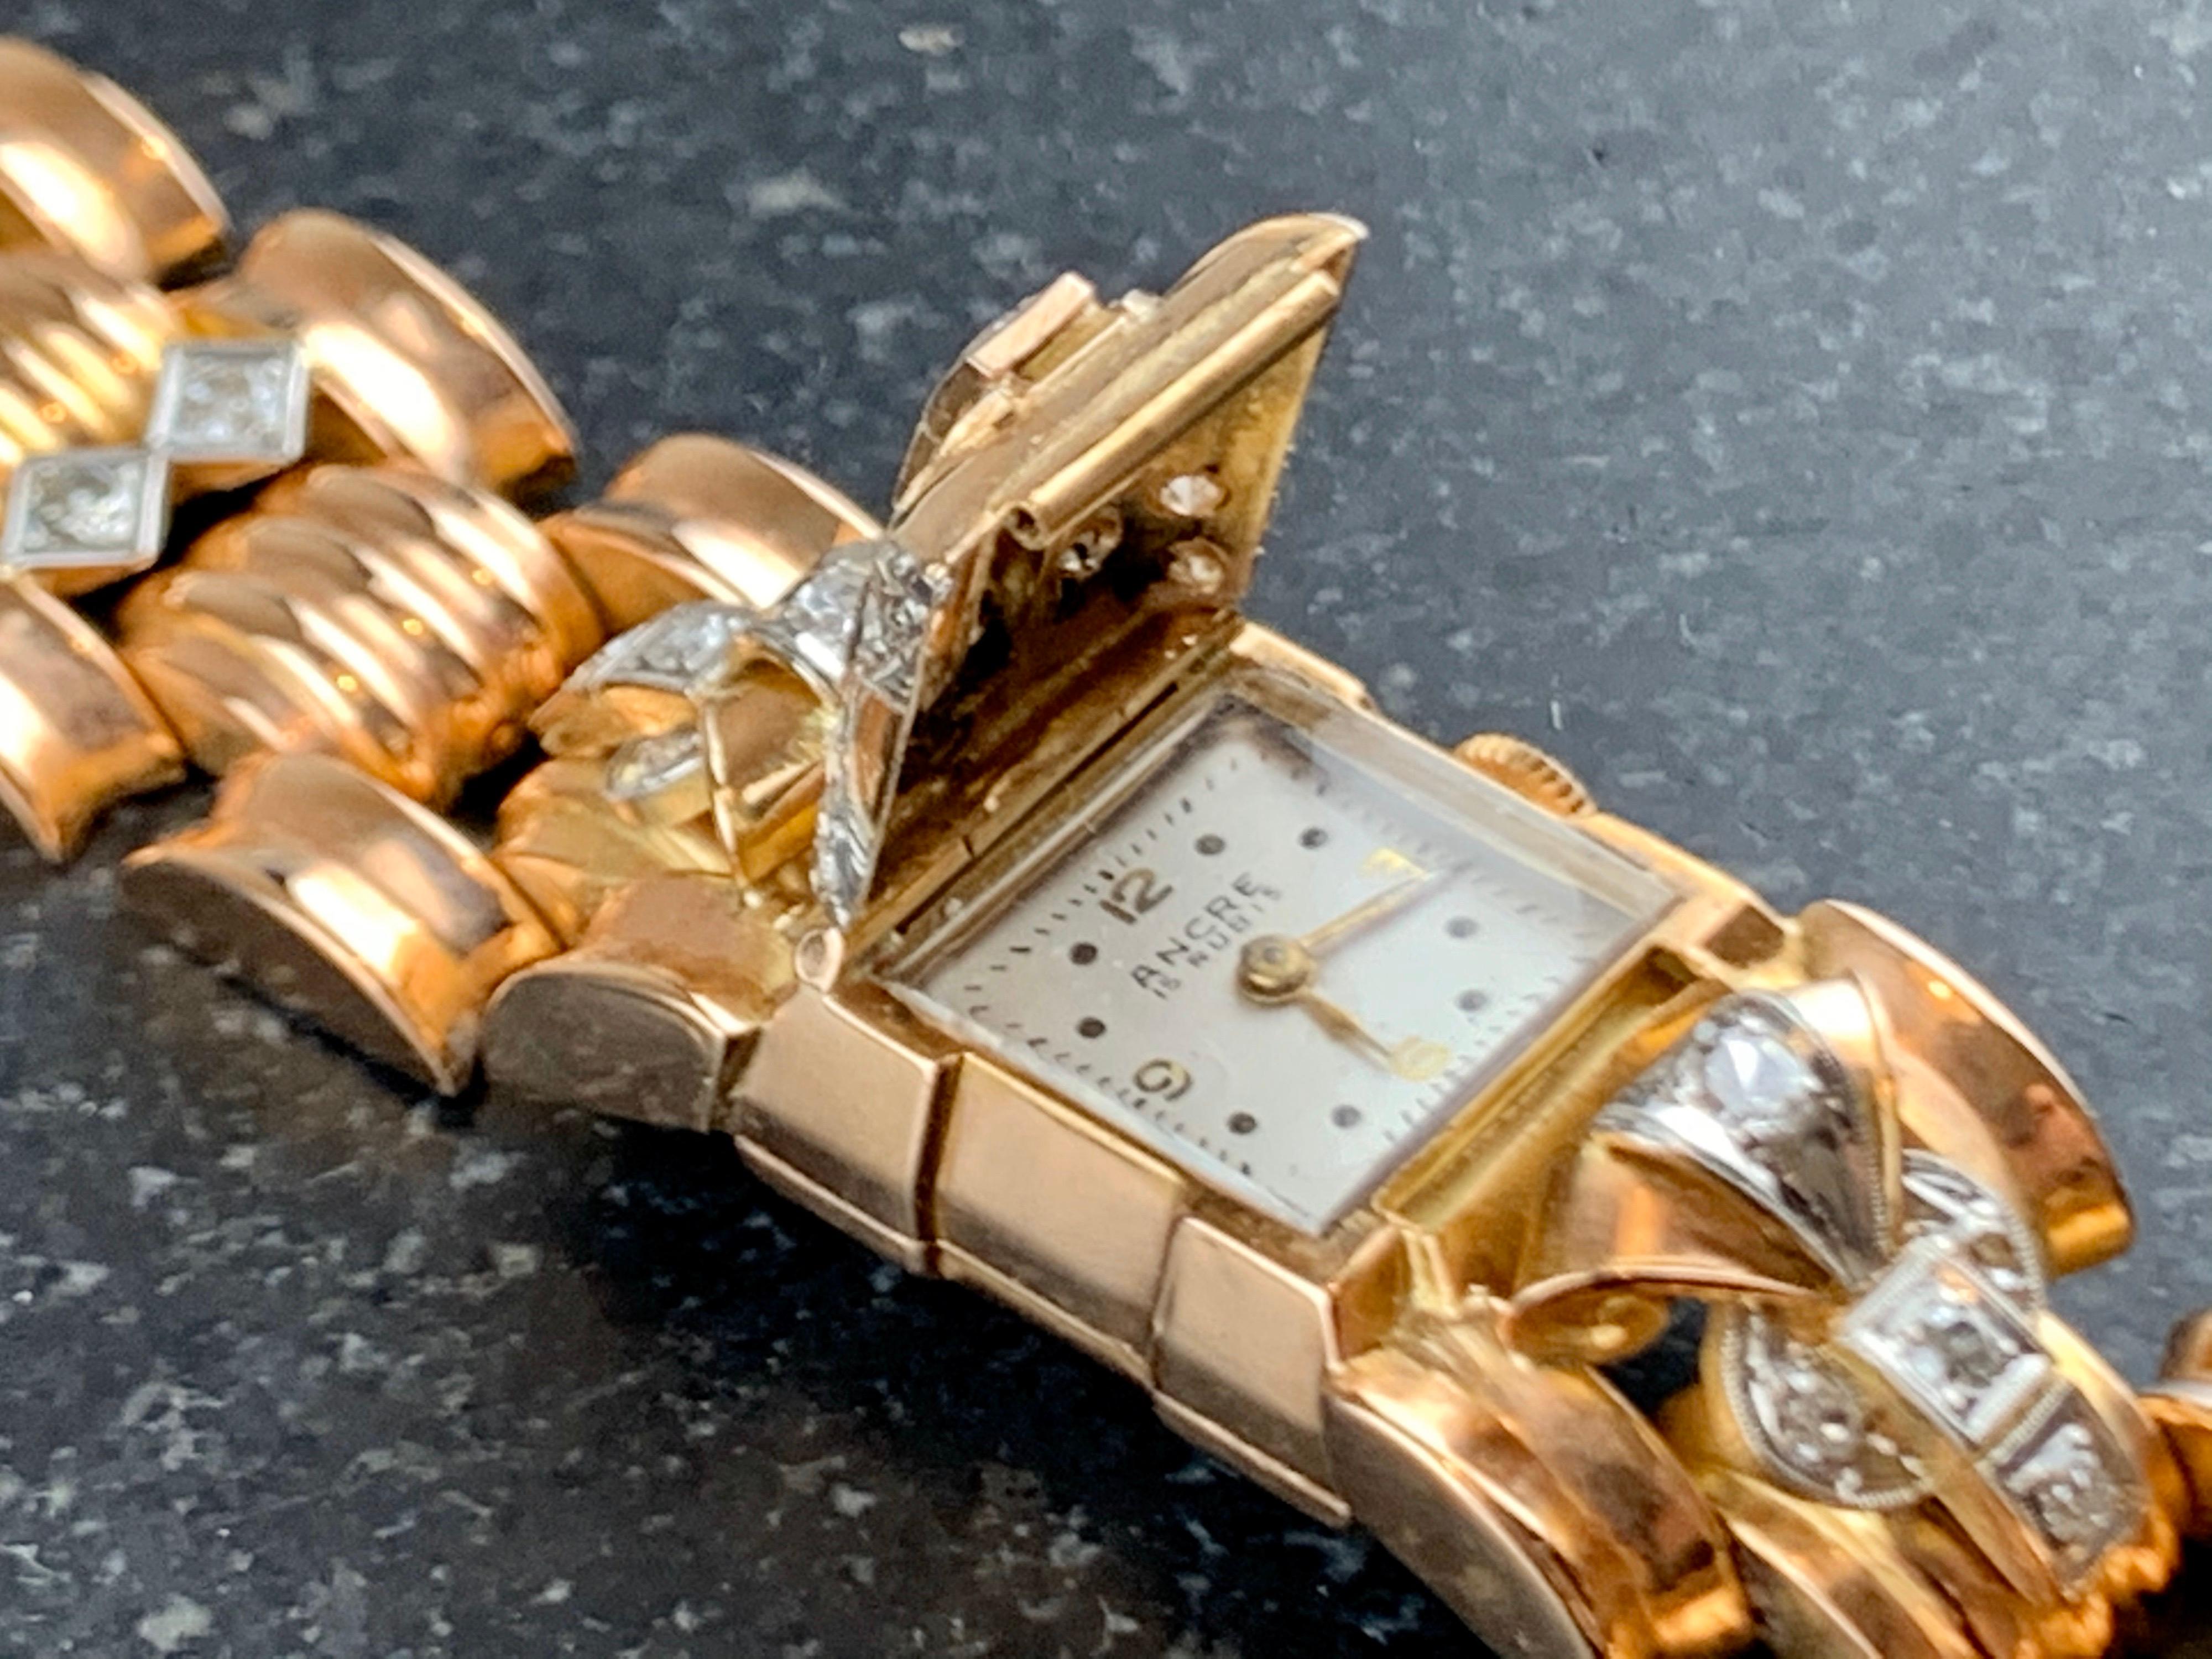 Art Deco, 1920`s-1940`s Ancre 15 Rubis 18 Carat Rose Gold 1.5 Carat Diamond Ladies Cocktail Wrist Watch. Complete With 18 Carat Rose Gold Bracelet Strap With Brilliant Cut Diamonds. Unusual Piece, The Wound Watch Is Hidden By Bracelet Fascia With An